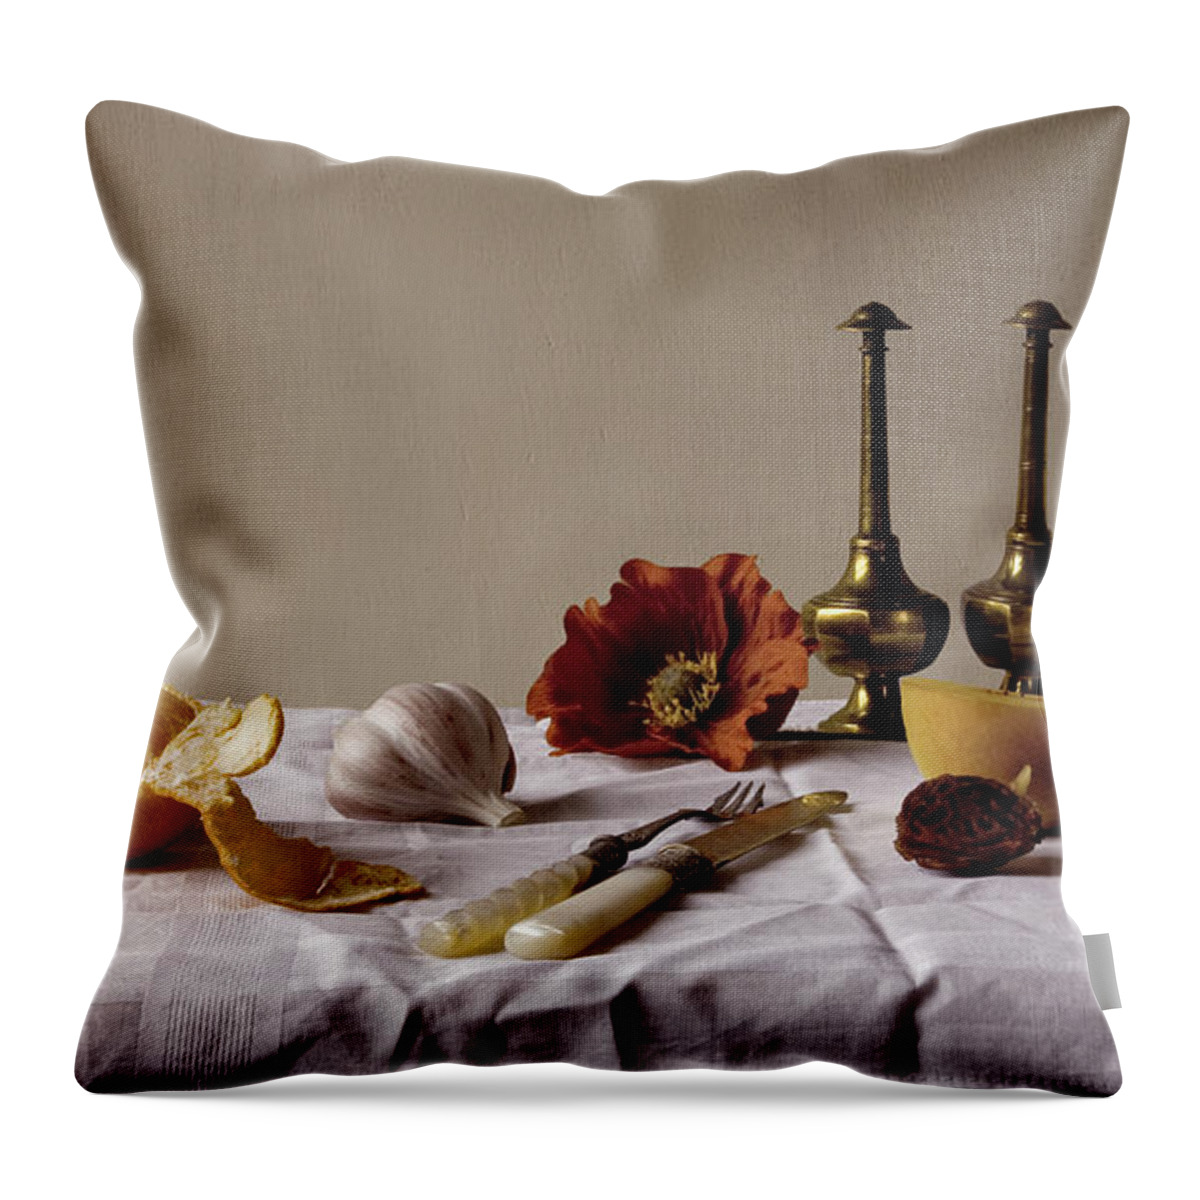 Orange Throw Pillow featuring the photograph Old Kitchen Still Life by Pch